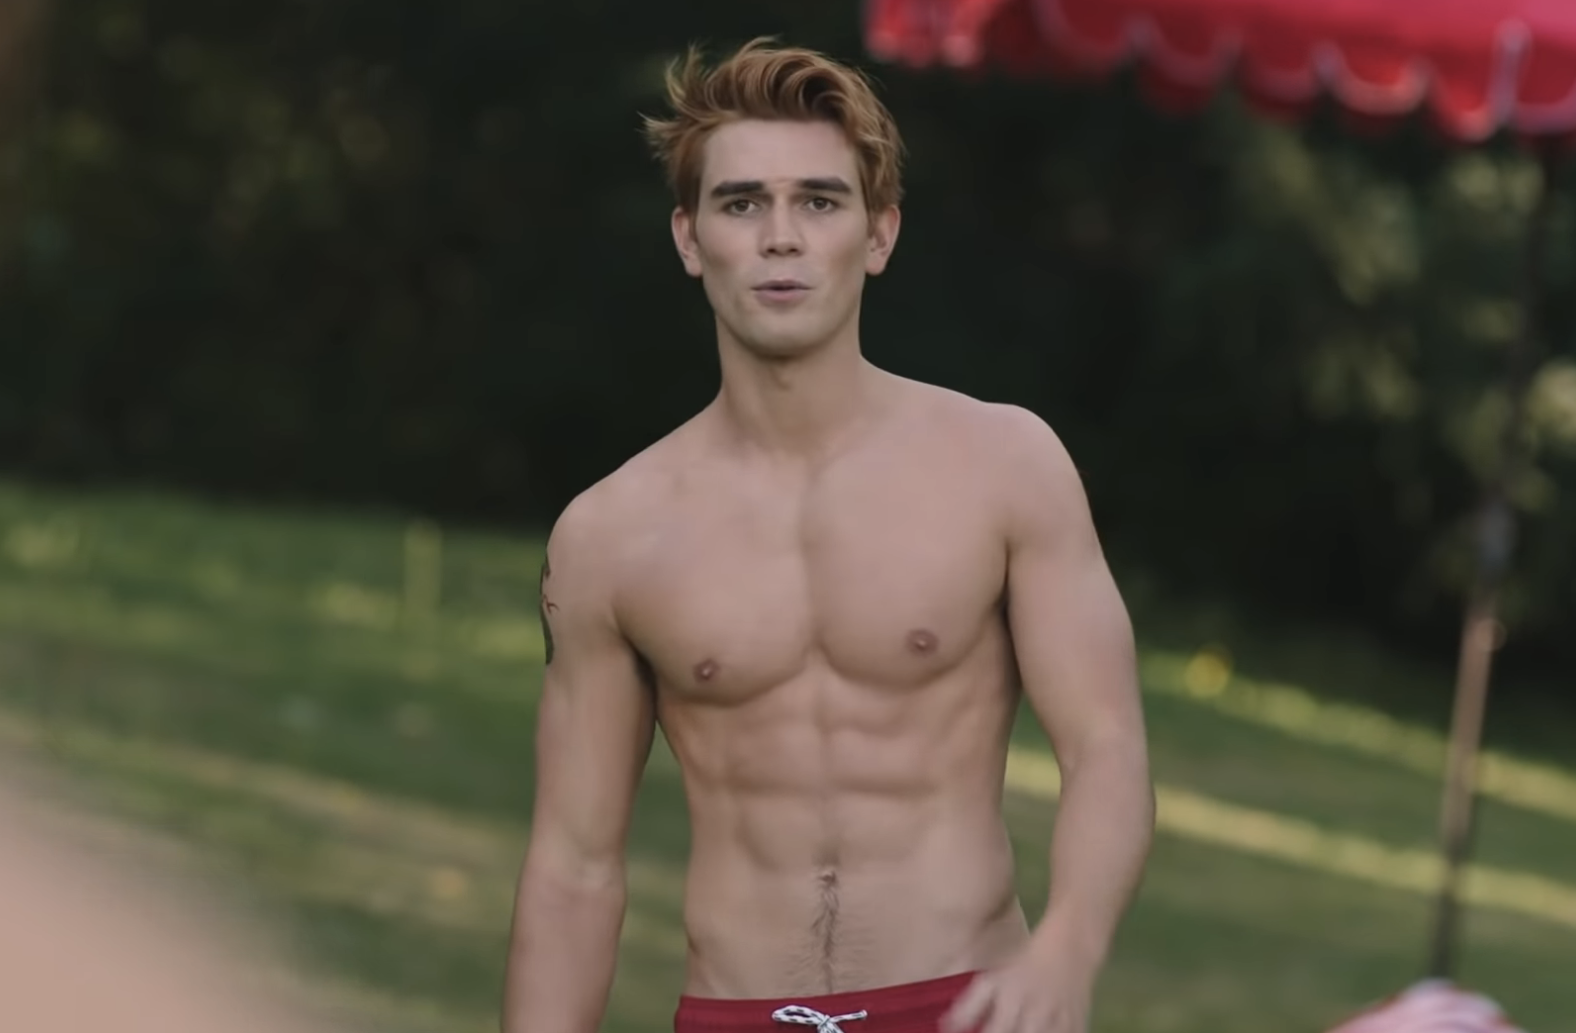 A shirtless KJ as Archie in &quot;Riverdale&quot;